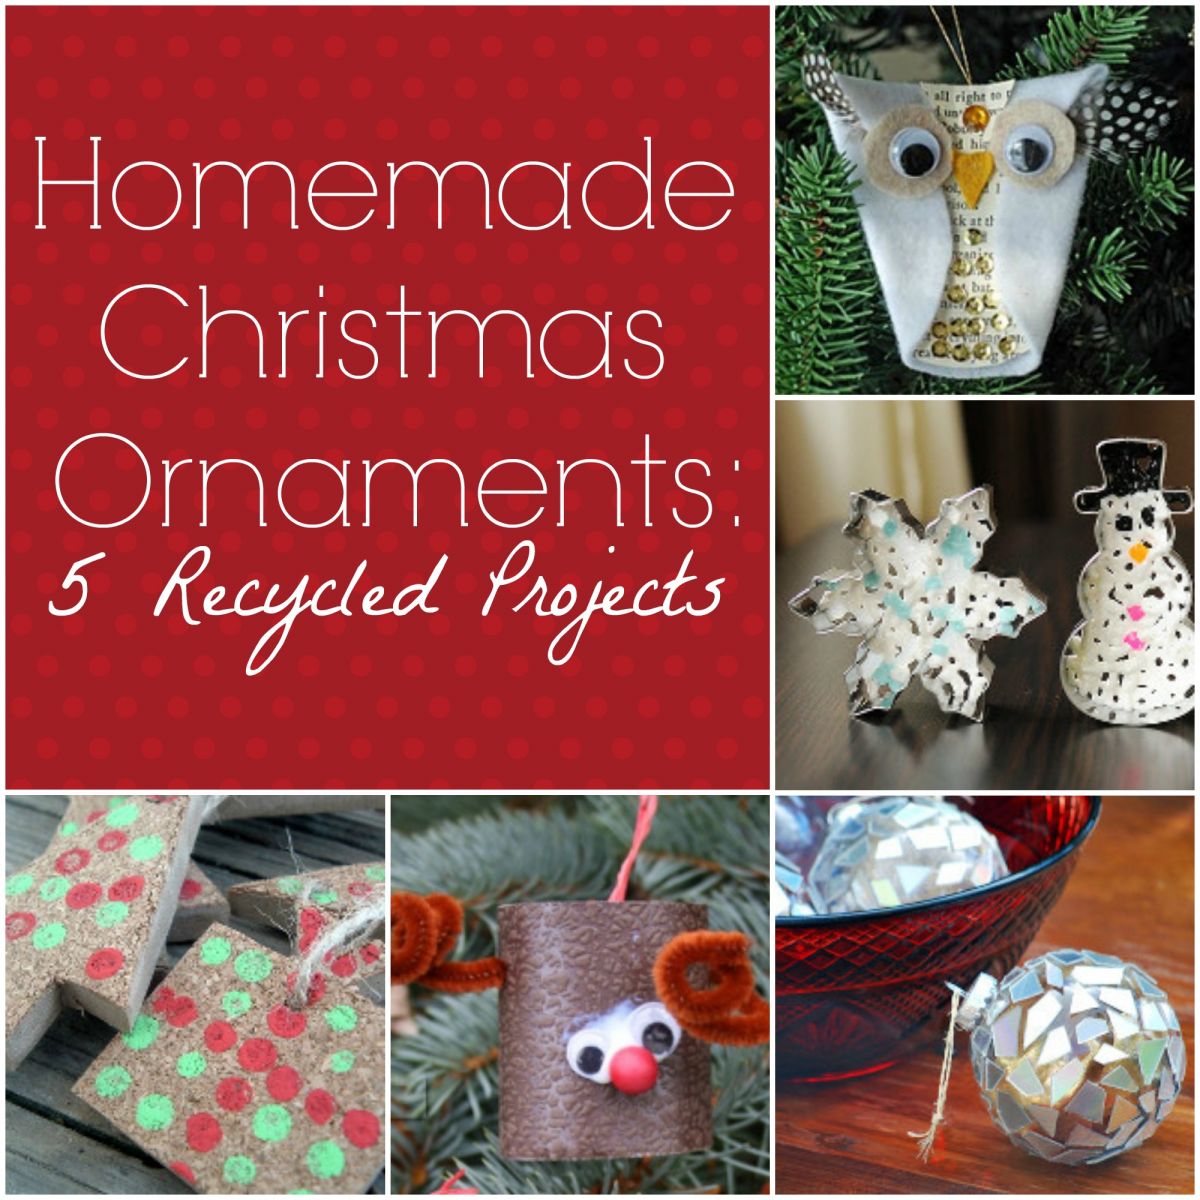 Homemade Christmas Ornaments 5 Recycled Projects  AllFreeKidsCrafts.com